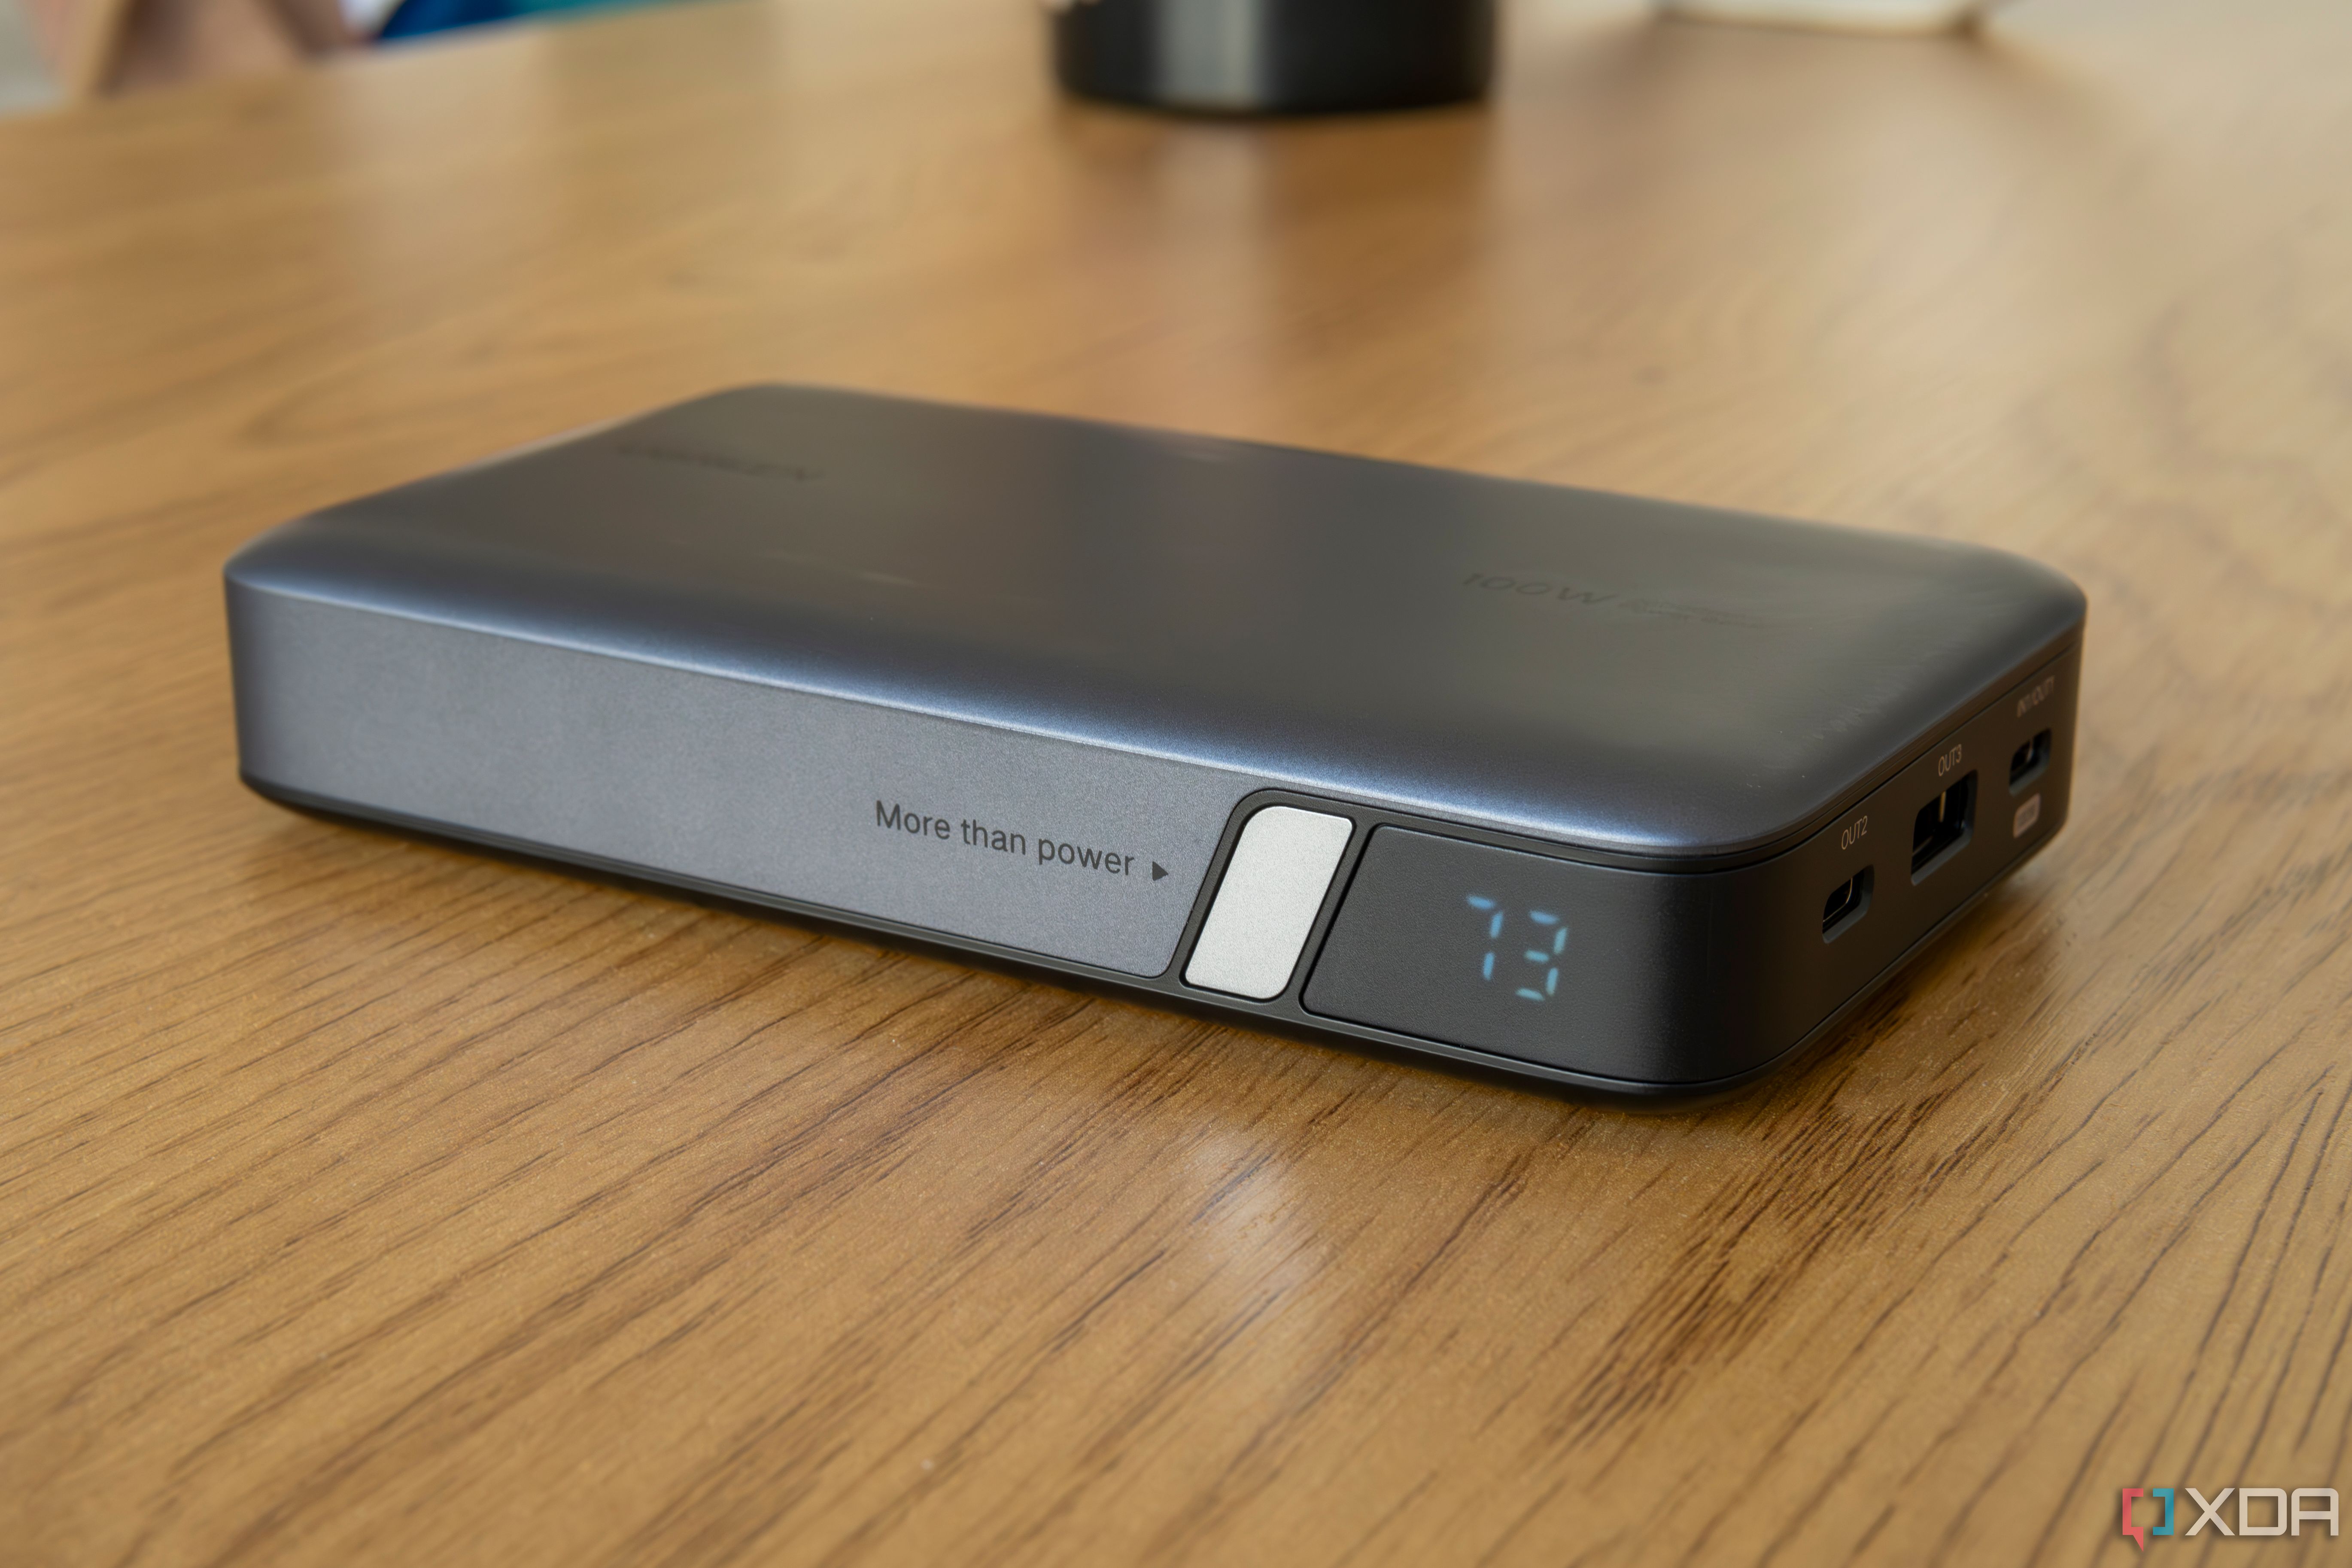 Ugreen 100W 20,000mAh Power Bank review: Extra juice for your laptop